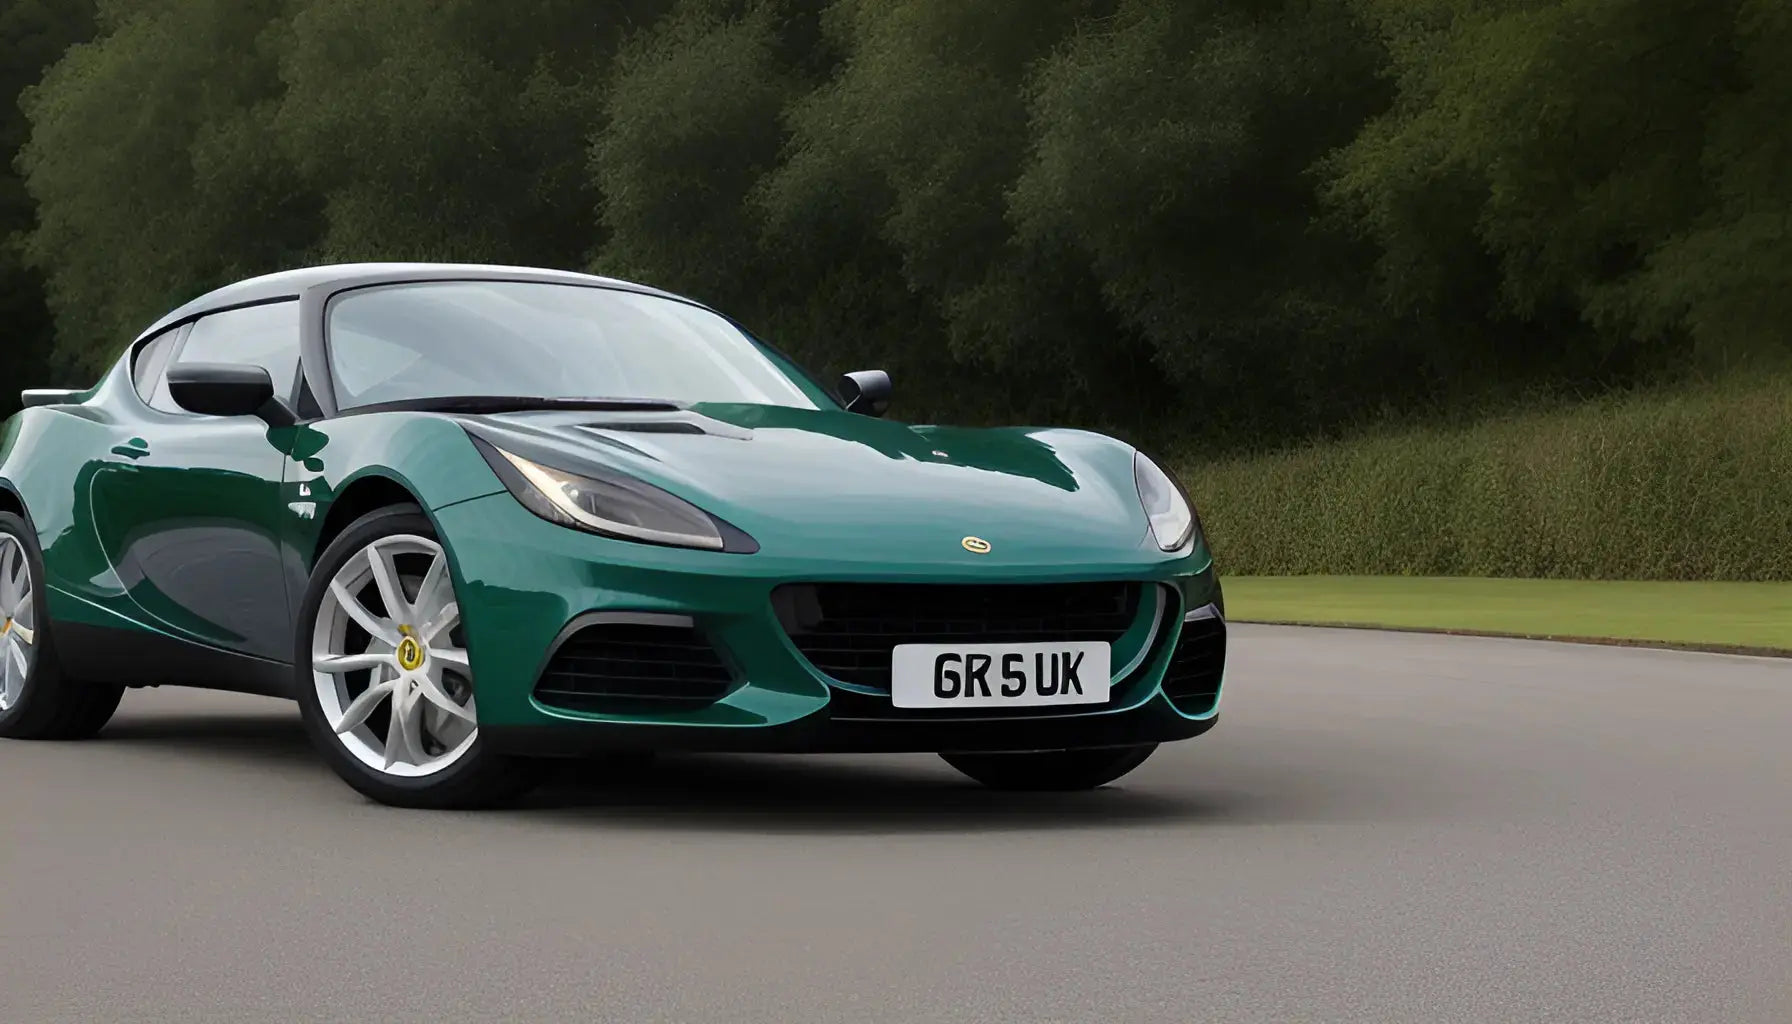 What We Know About the Lotus Emira - 